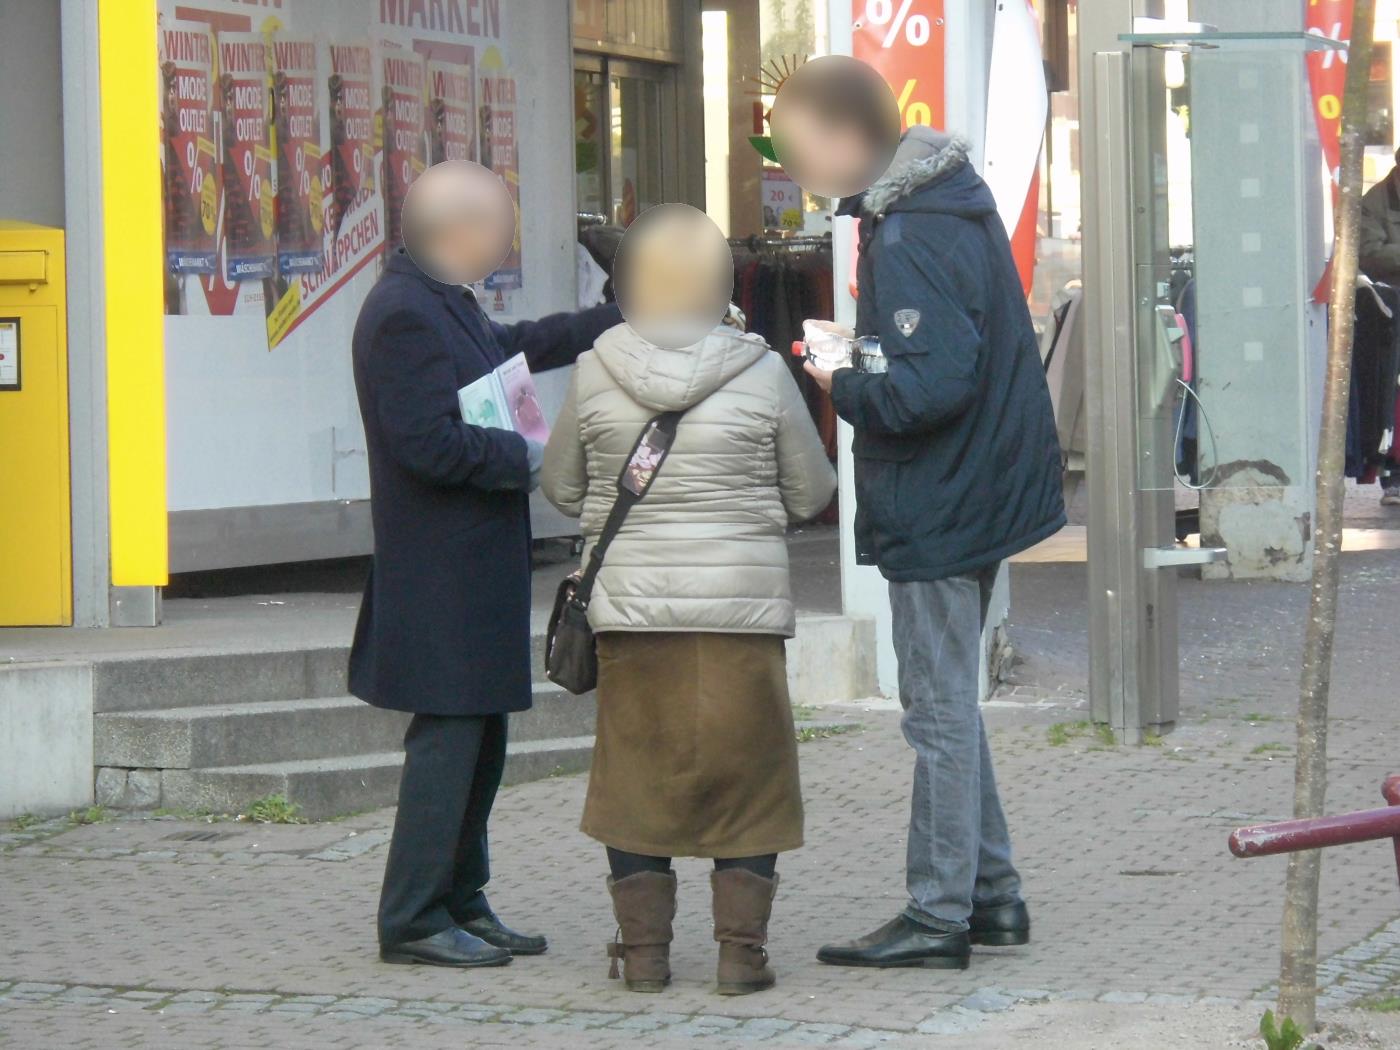 Wiesloch Jehovah's Witnesses cheeky again